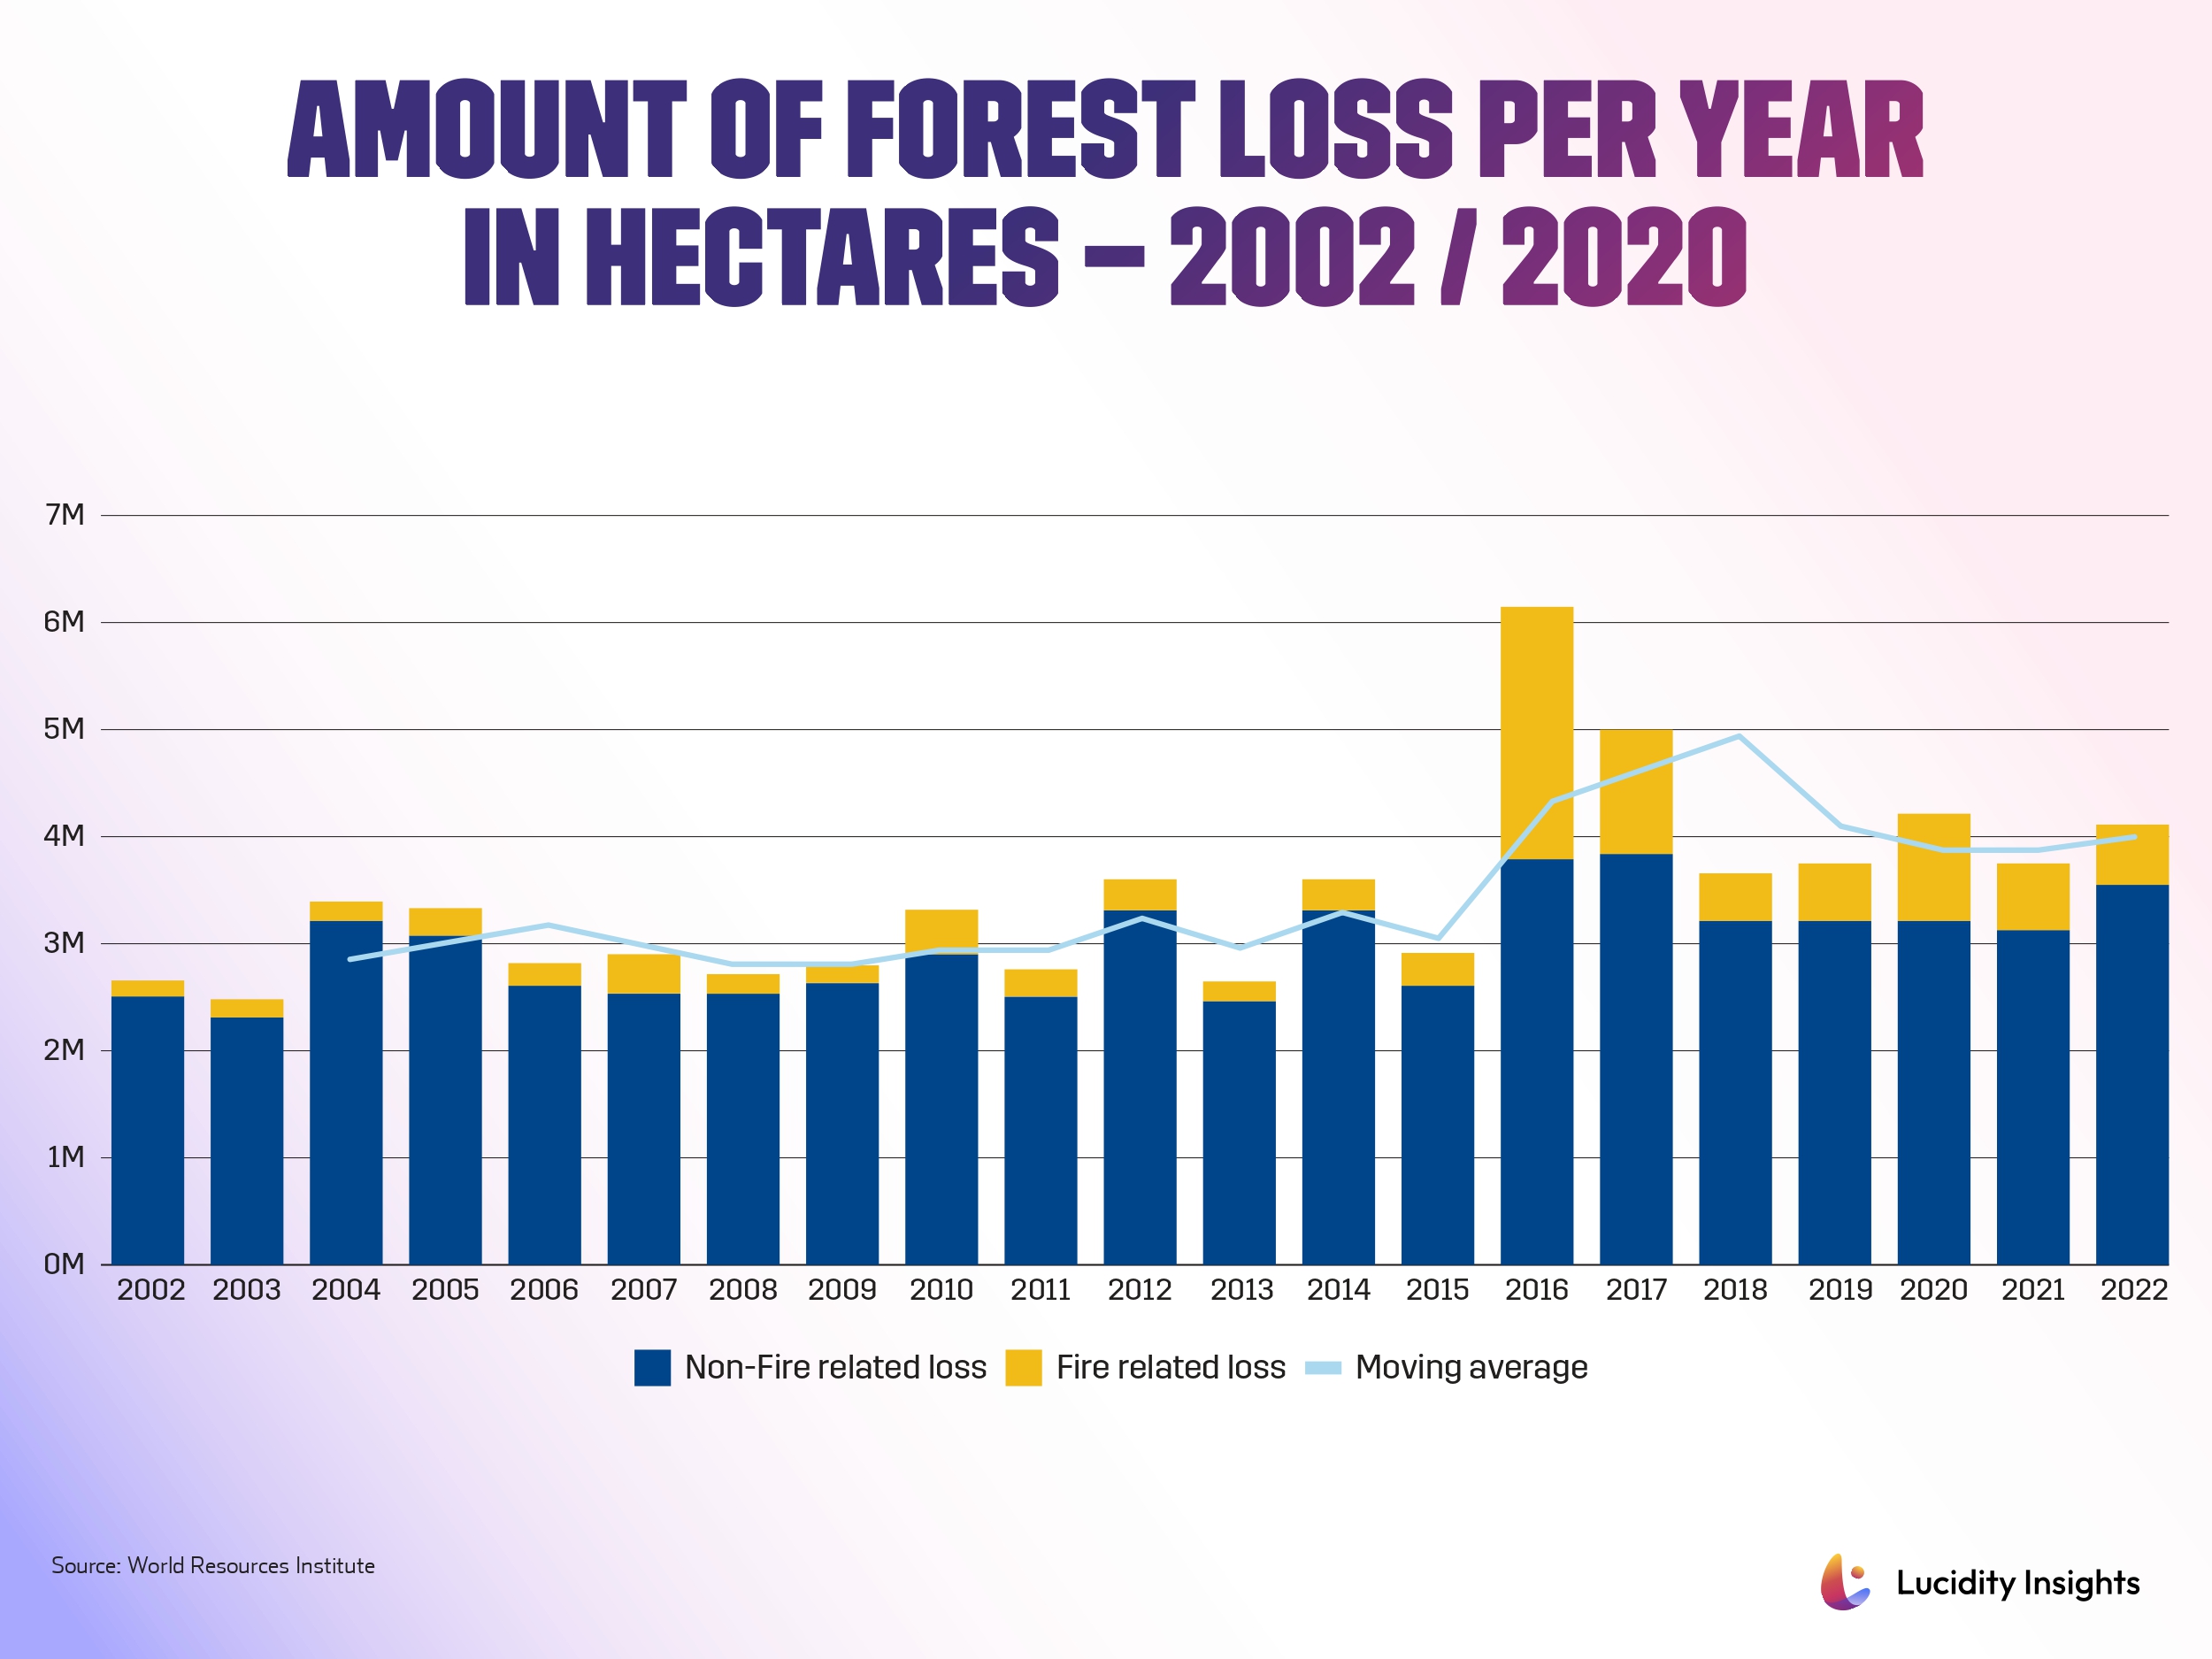 Amount of Forest Loss per Year in Hectares in the Last 20 Years